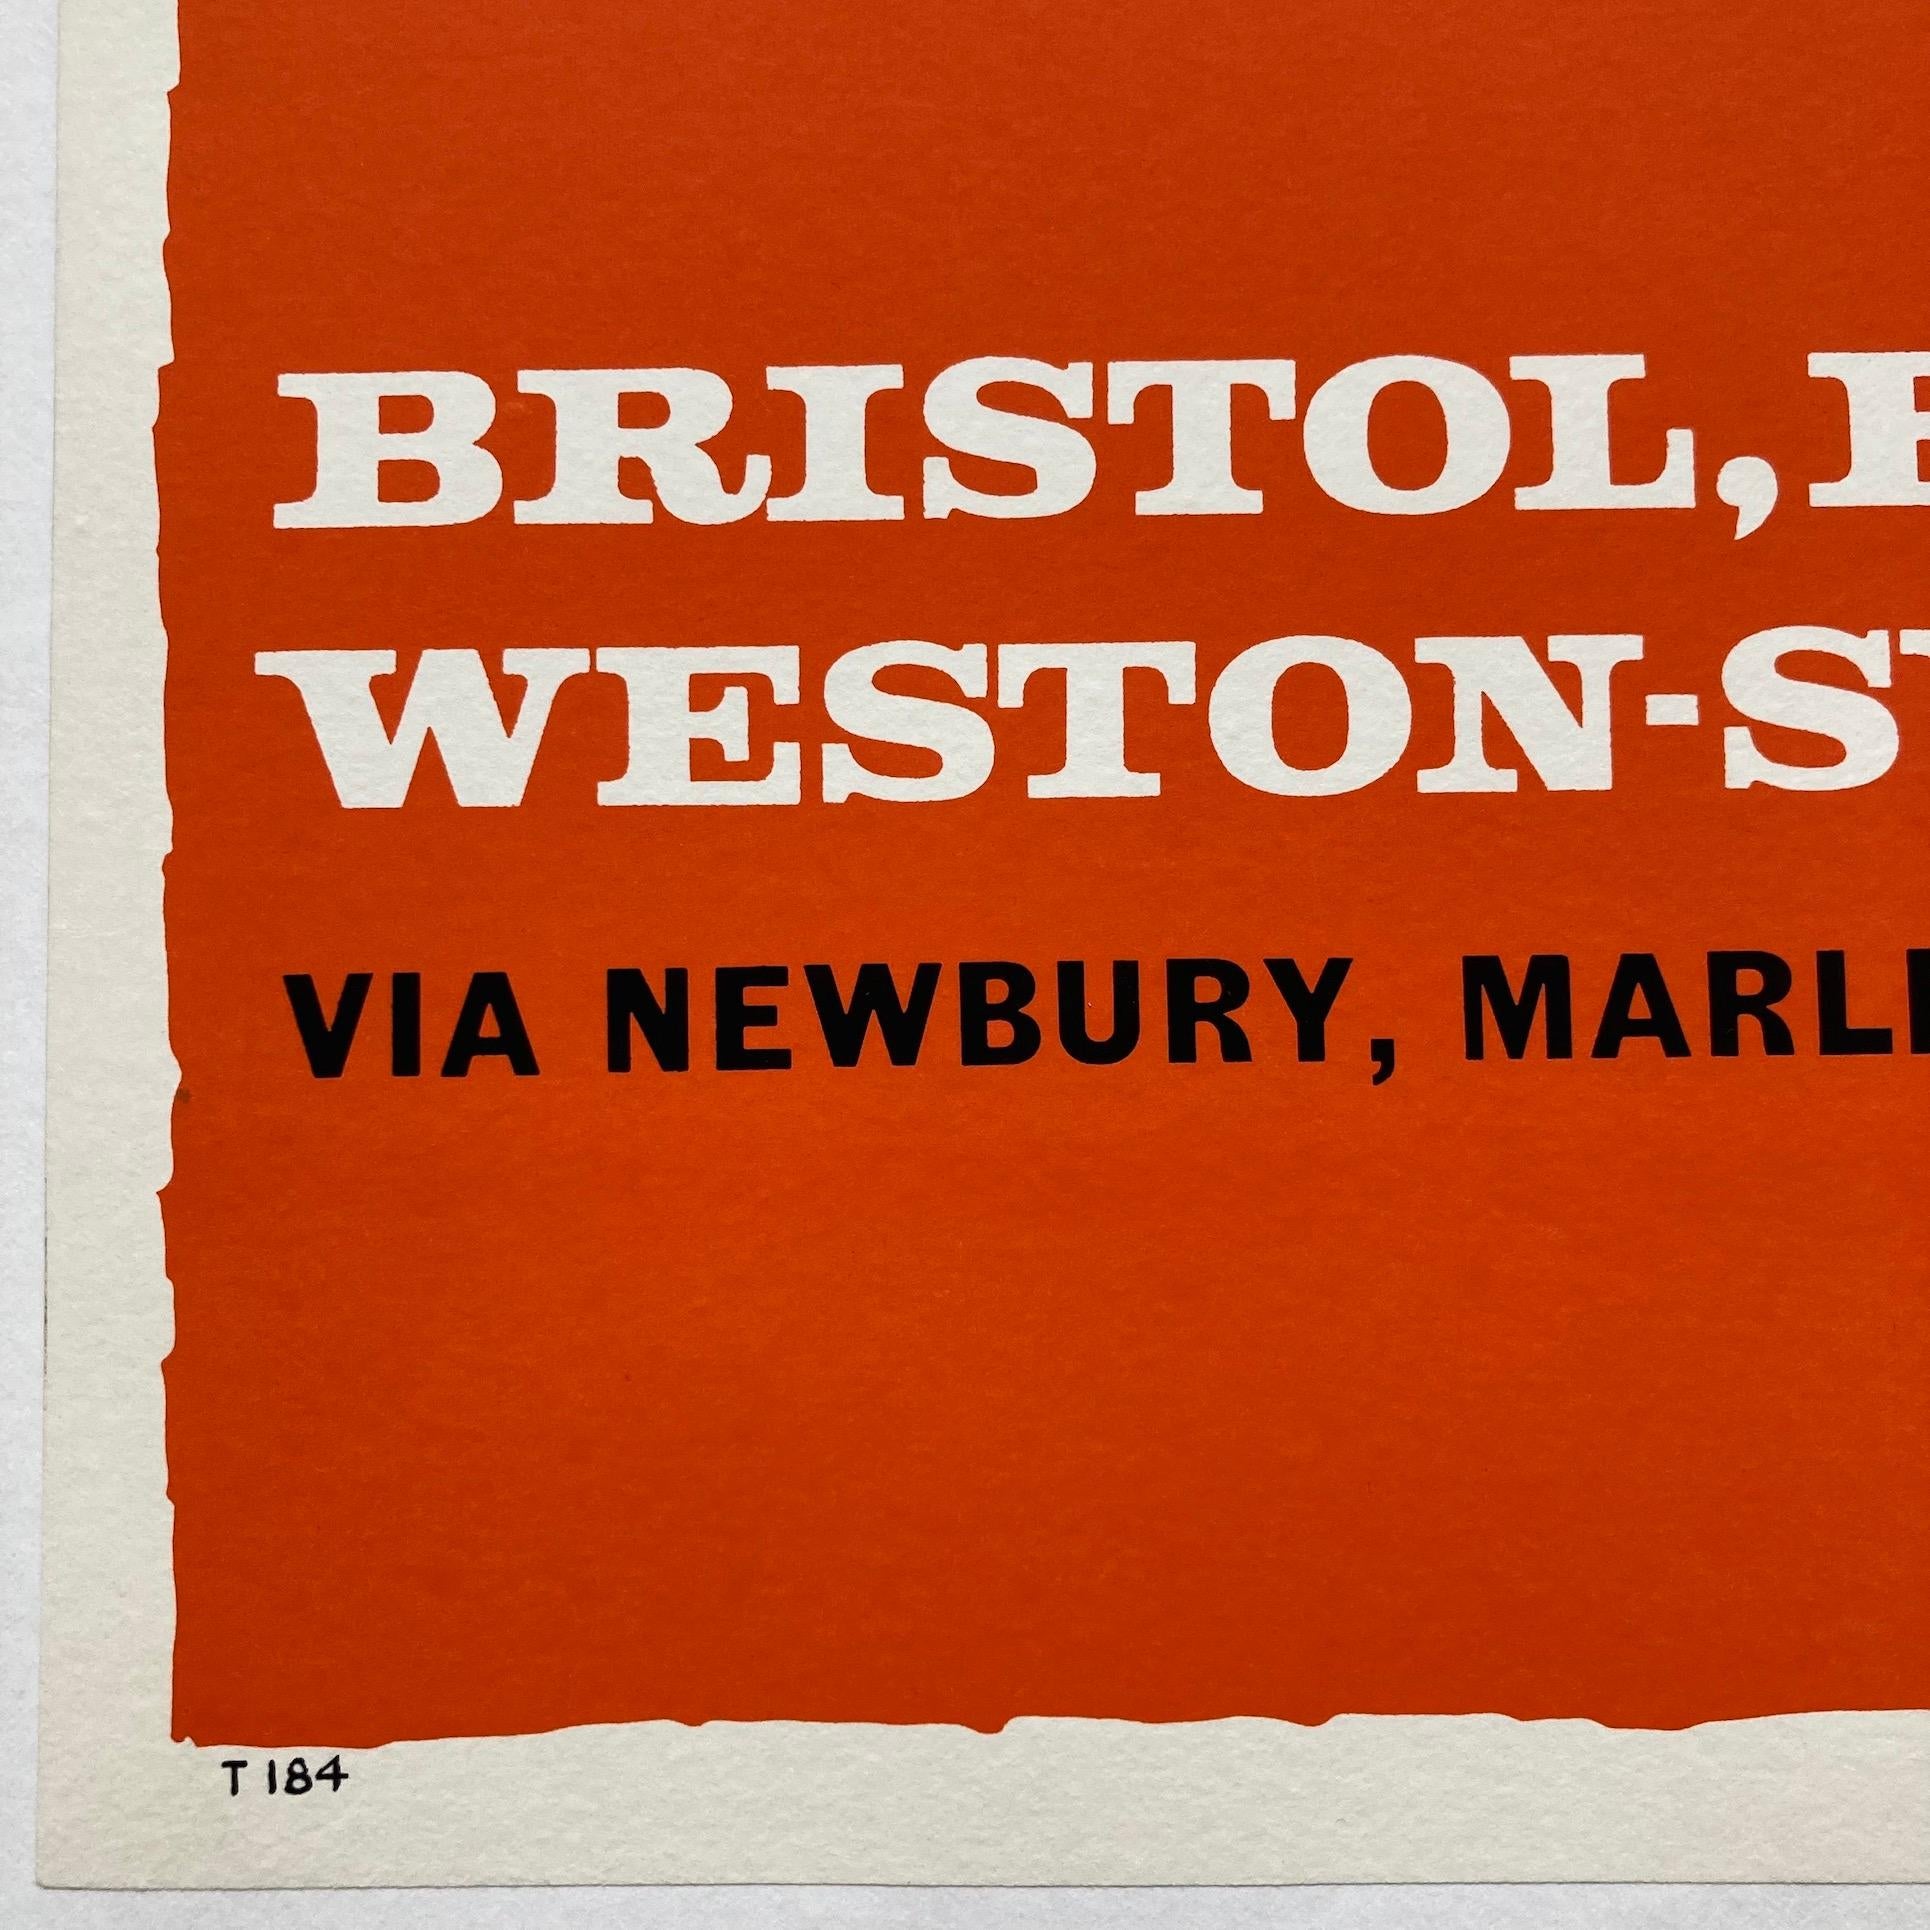 Original English 1960's coach panel poster by Studio Seven promoting Express Coach Services from London Victoria to Bristol, Bath and Weston-Super-Mare via Newbury, Marlborough and Chippenham. This colourful and rare poster would have been displayed